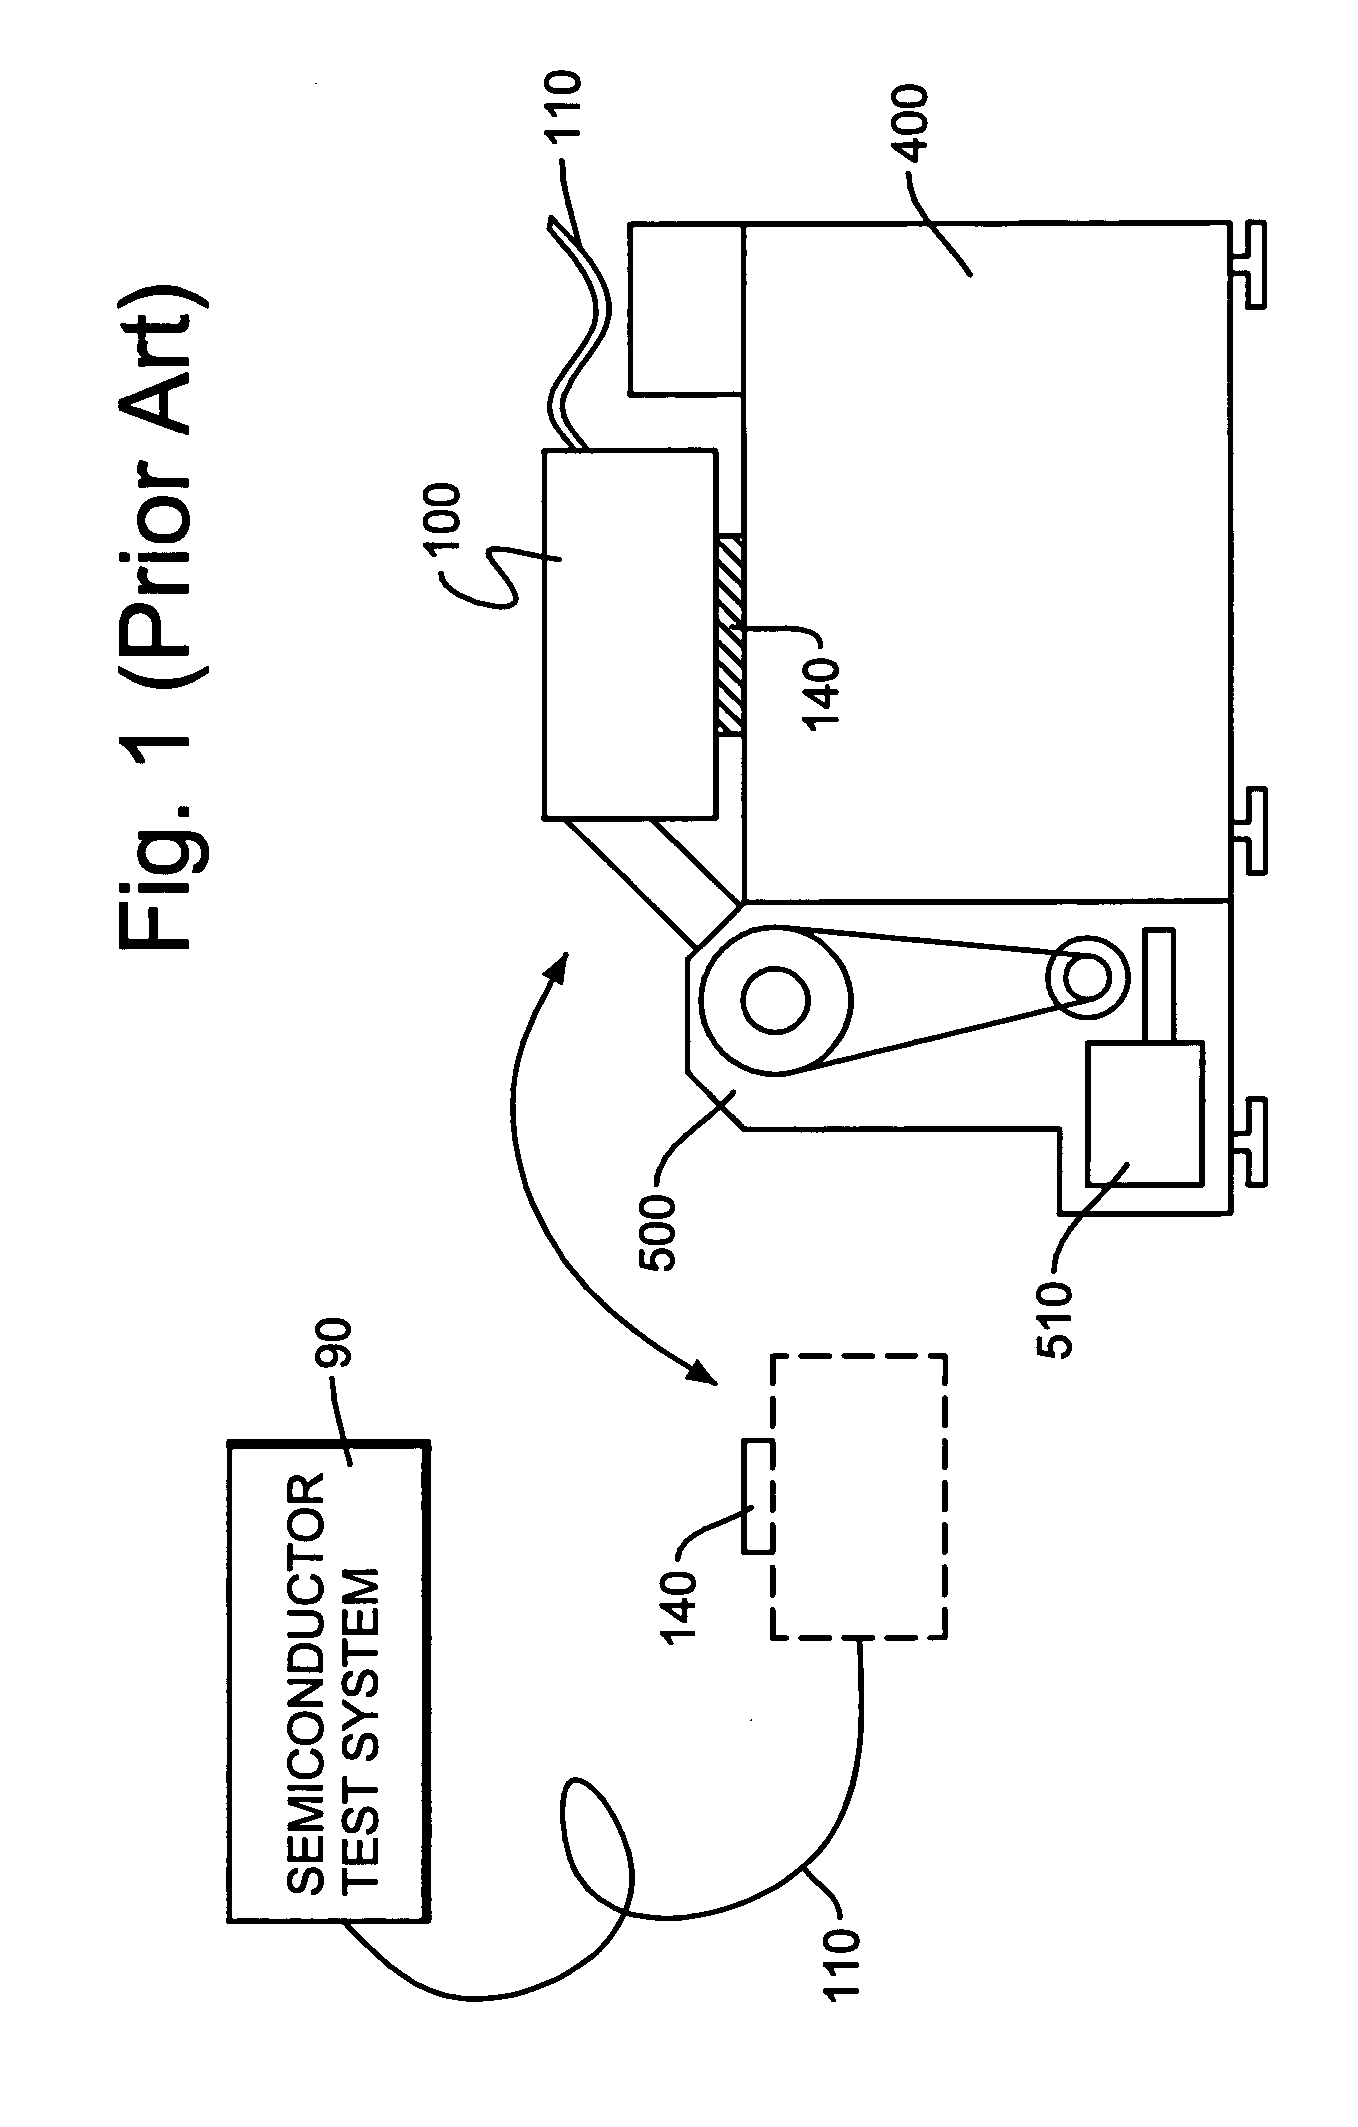 Probe contact system using flexible printed circuit board